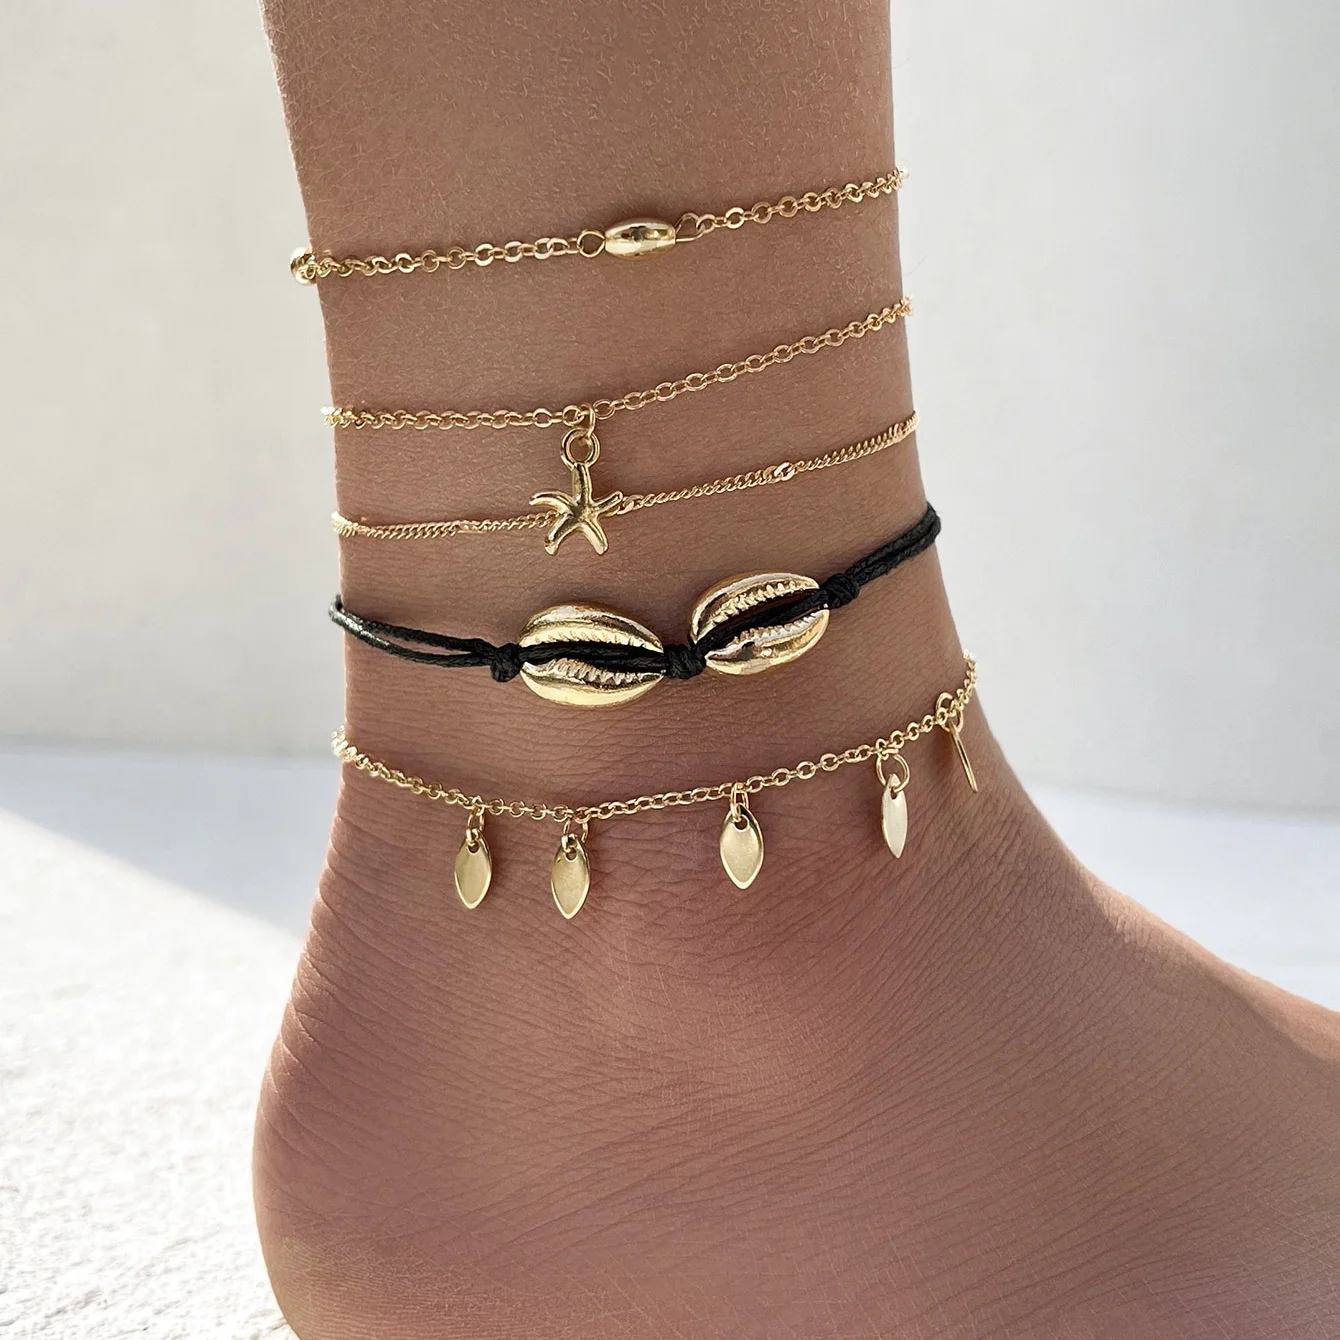 

Sindlan Gold Bohemian Tassel Shell Anklets Multi Layer 5pcs/Set Anklet Foot Jewelry For Women, As picture shows